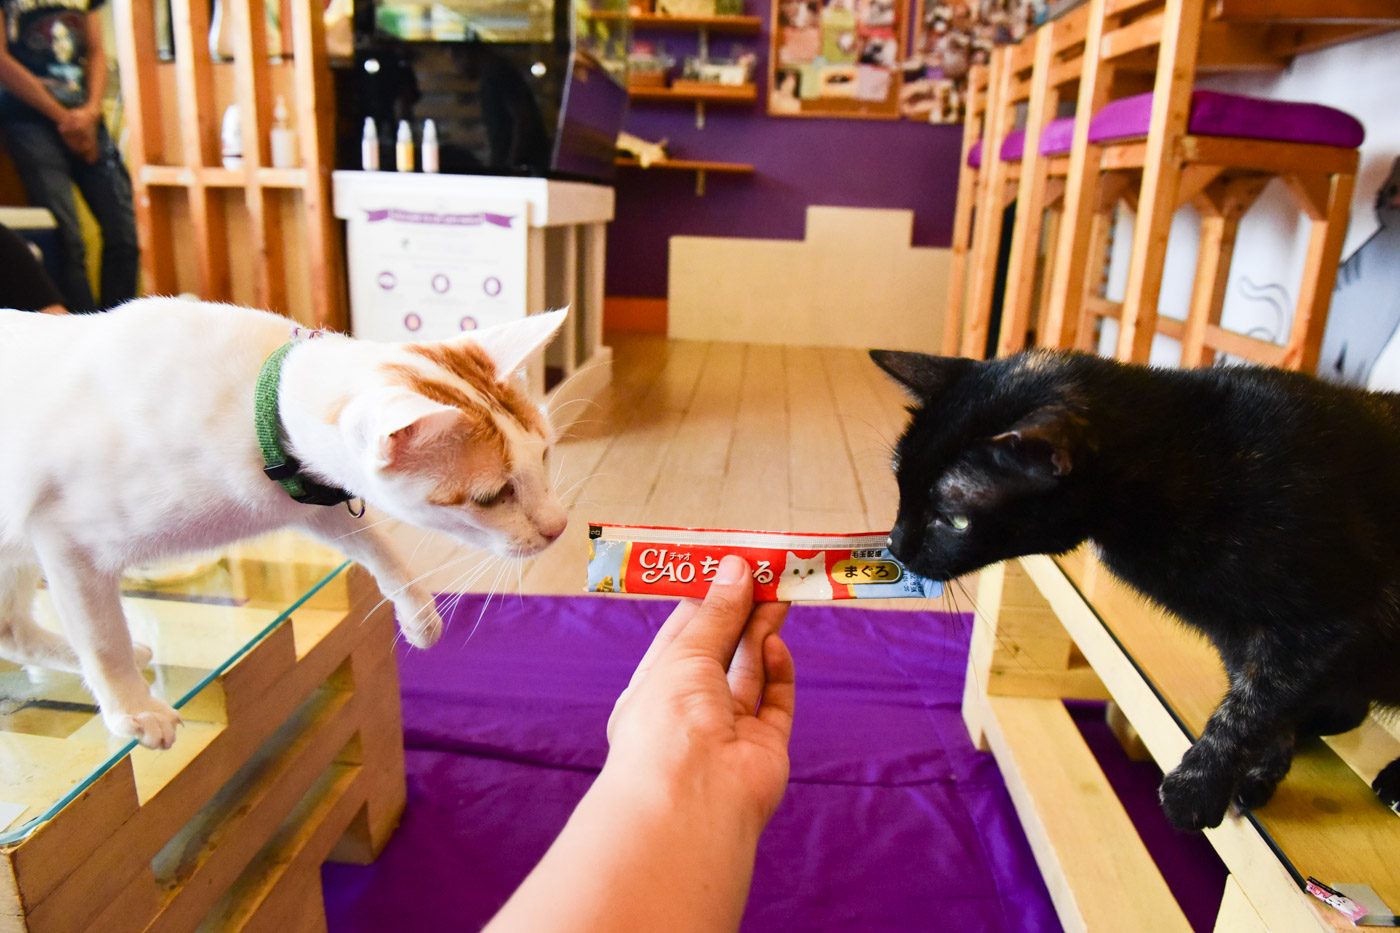 TREATS. The café also sells treats that guests can give to the resident cats. They say you can’t buy love, but Chaka and Scarlet beg to disagree.
 